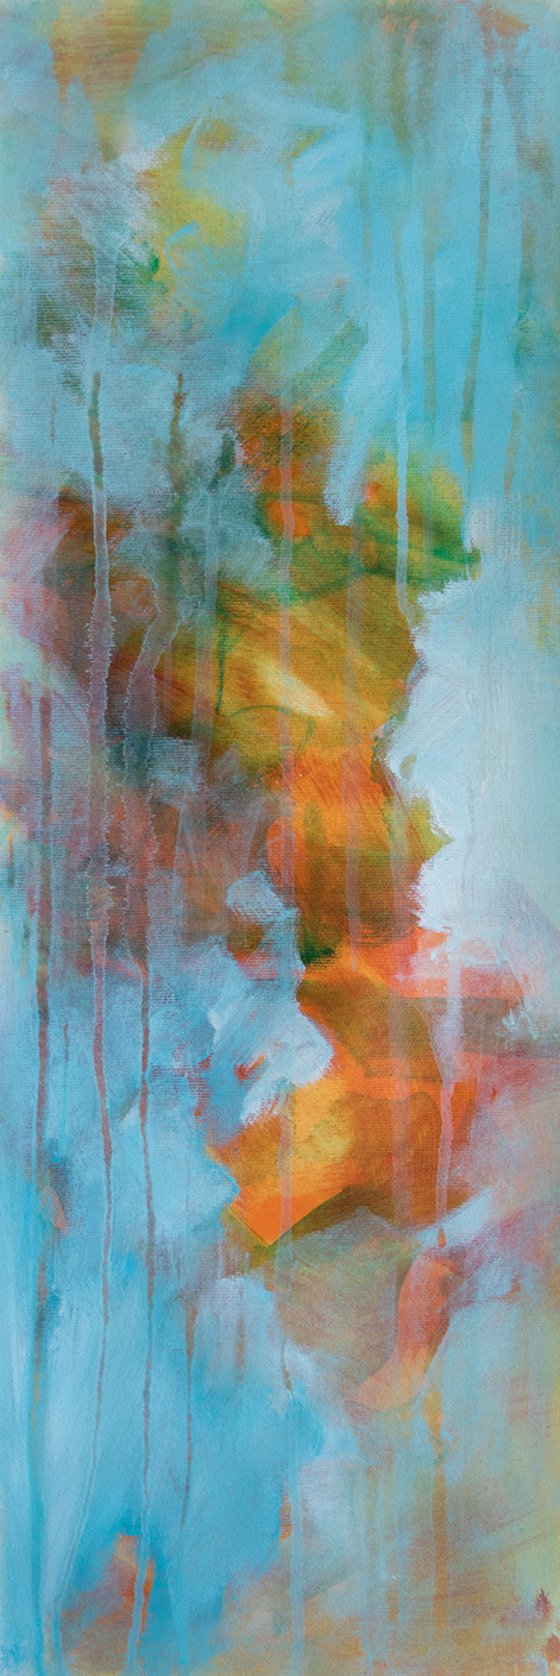 ABSTRACT PAINTING - Ice and fire - Both vertical and horizontal hanging !